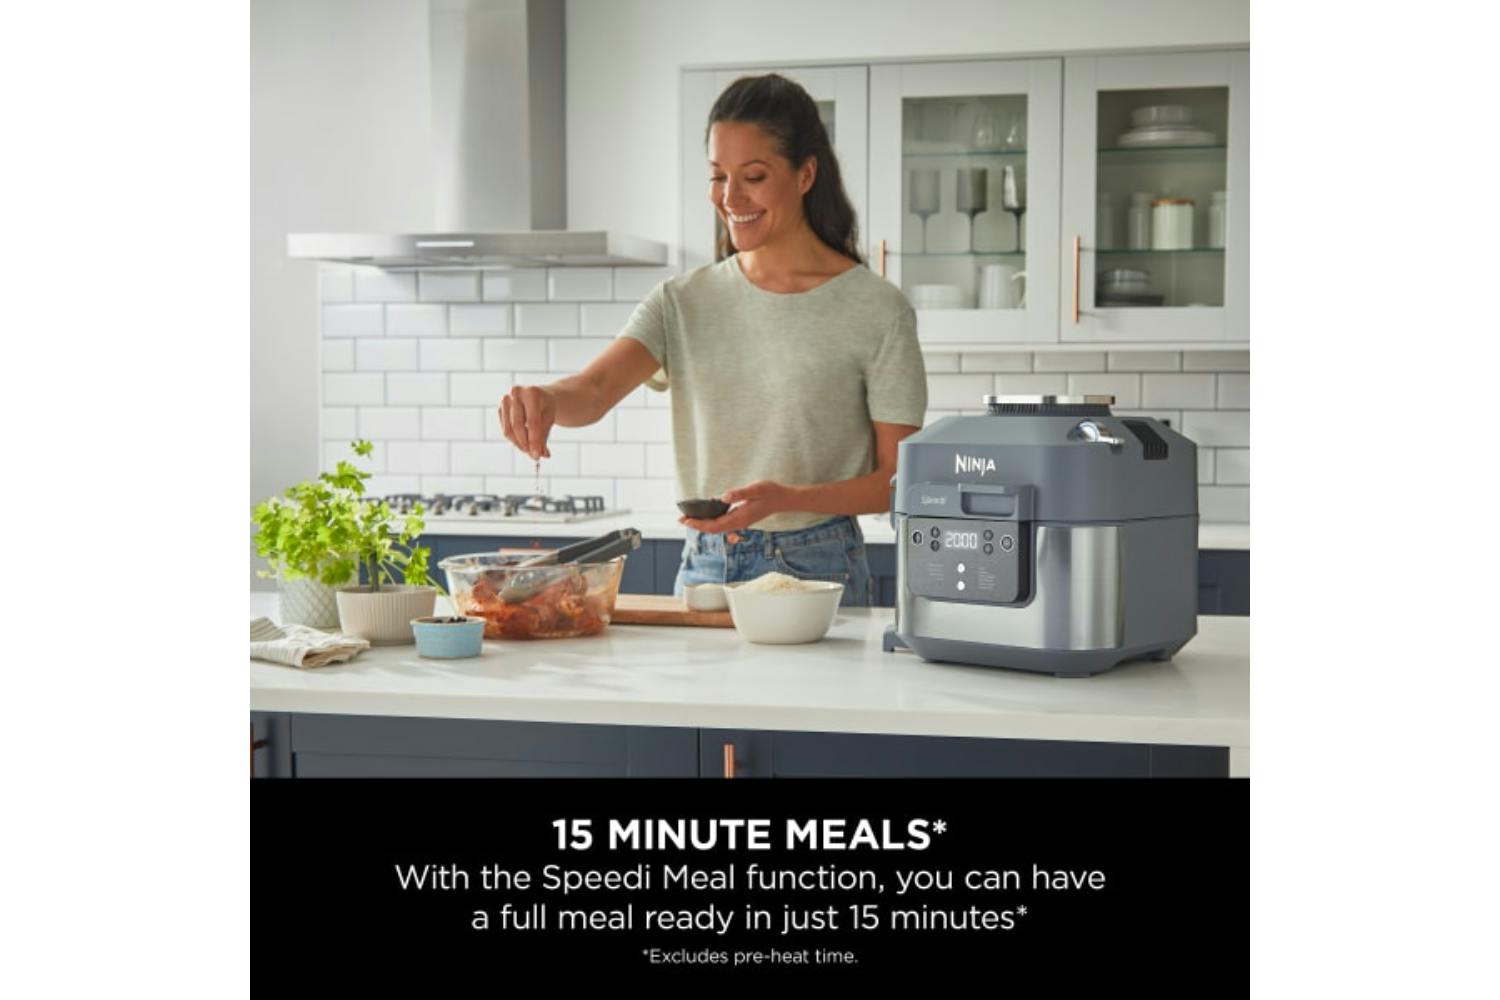 Ninja Rapid Cooker that makes healthy meals in just 15 minutes has